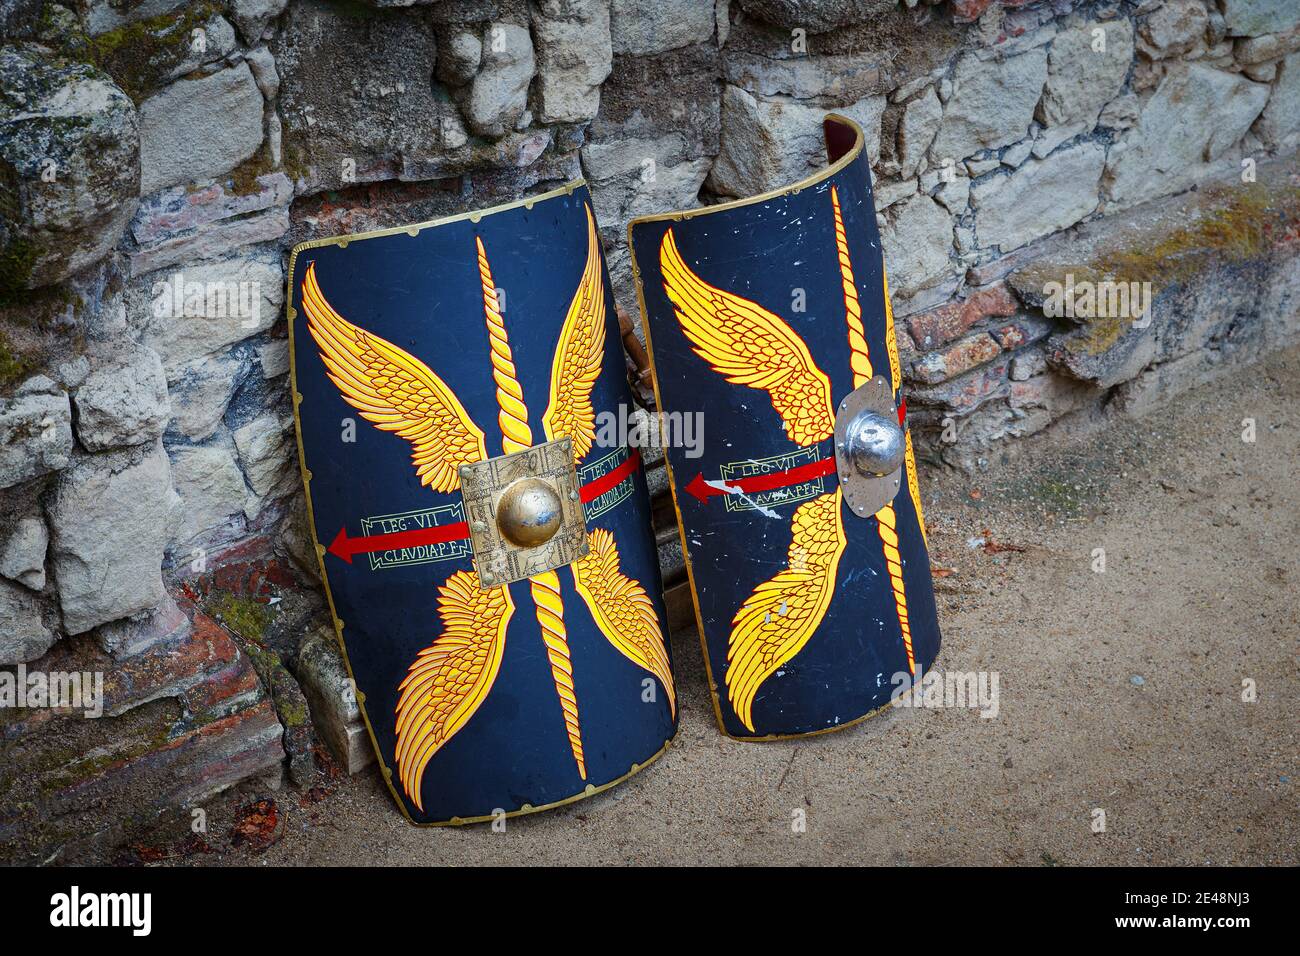 MERIDA, SPAIN - Sep 27, 2014: Two shields of the historical representation Emerita Ludica. This holiday commemorates the daily life and the wars in th Stock Photo